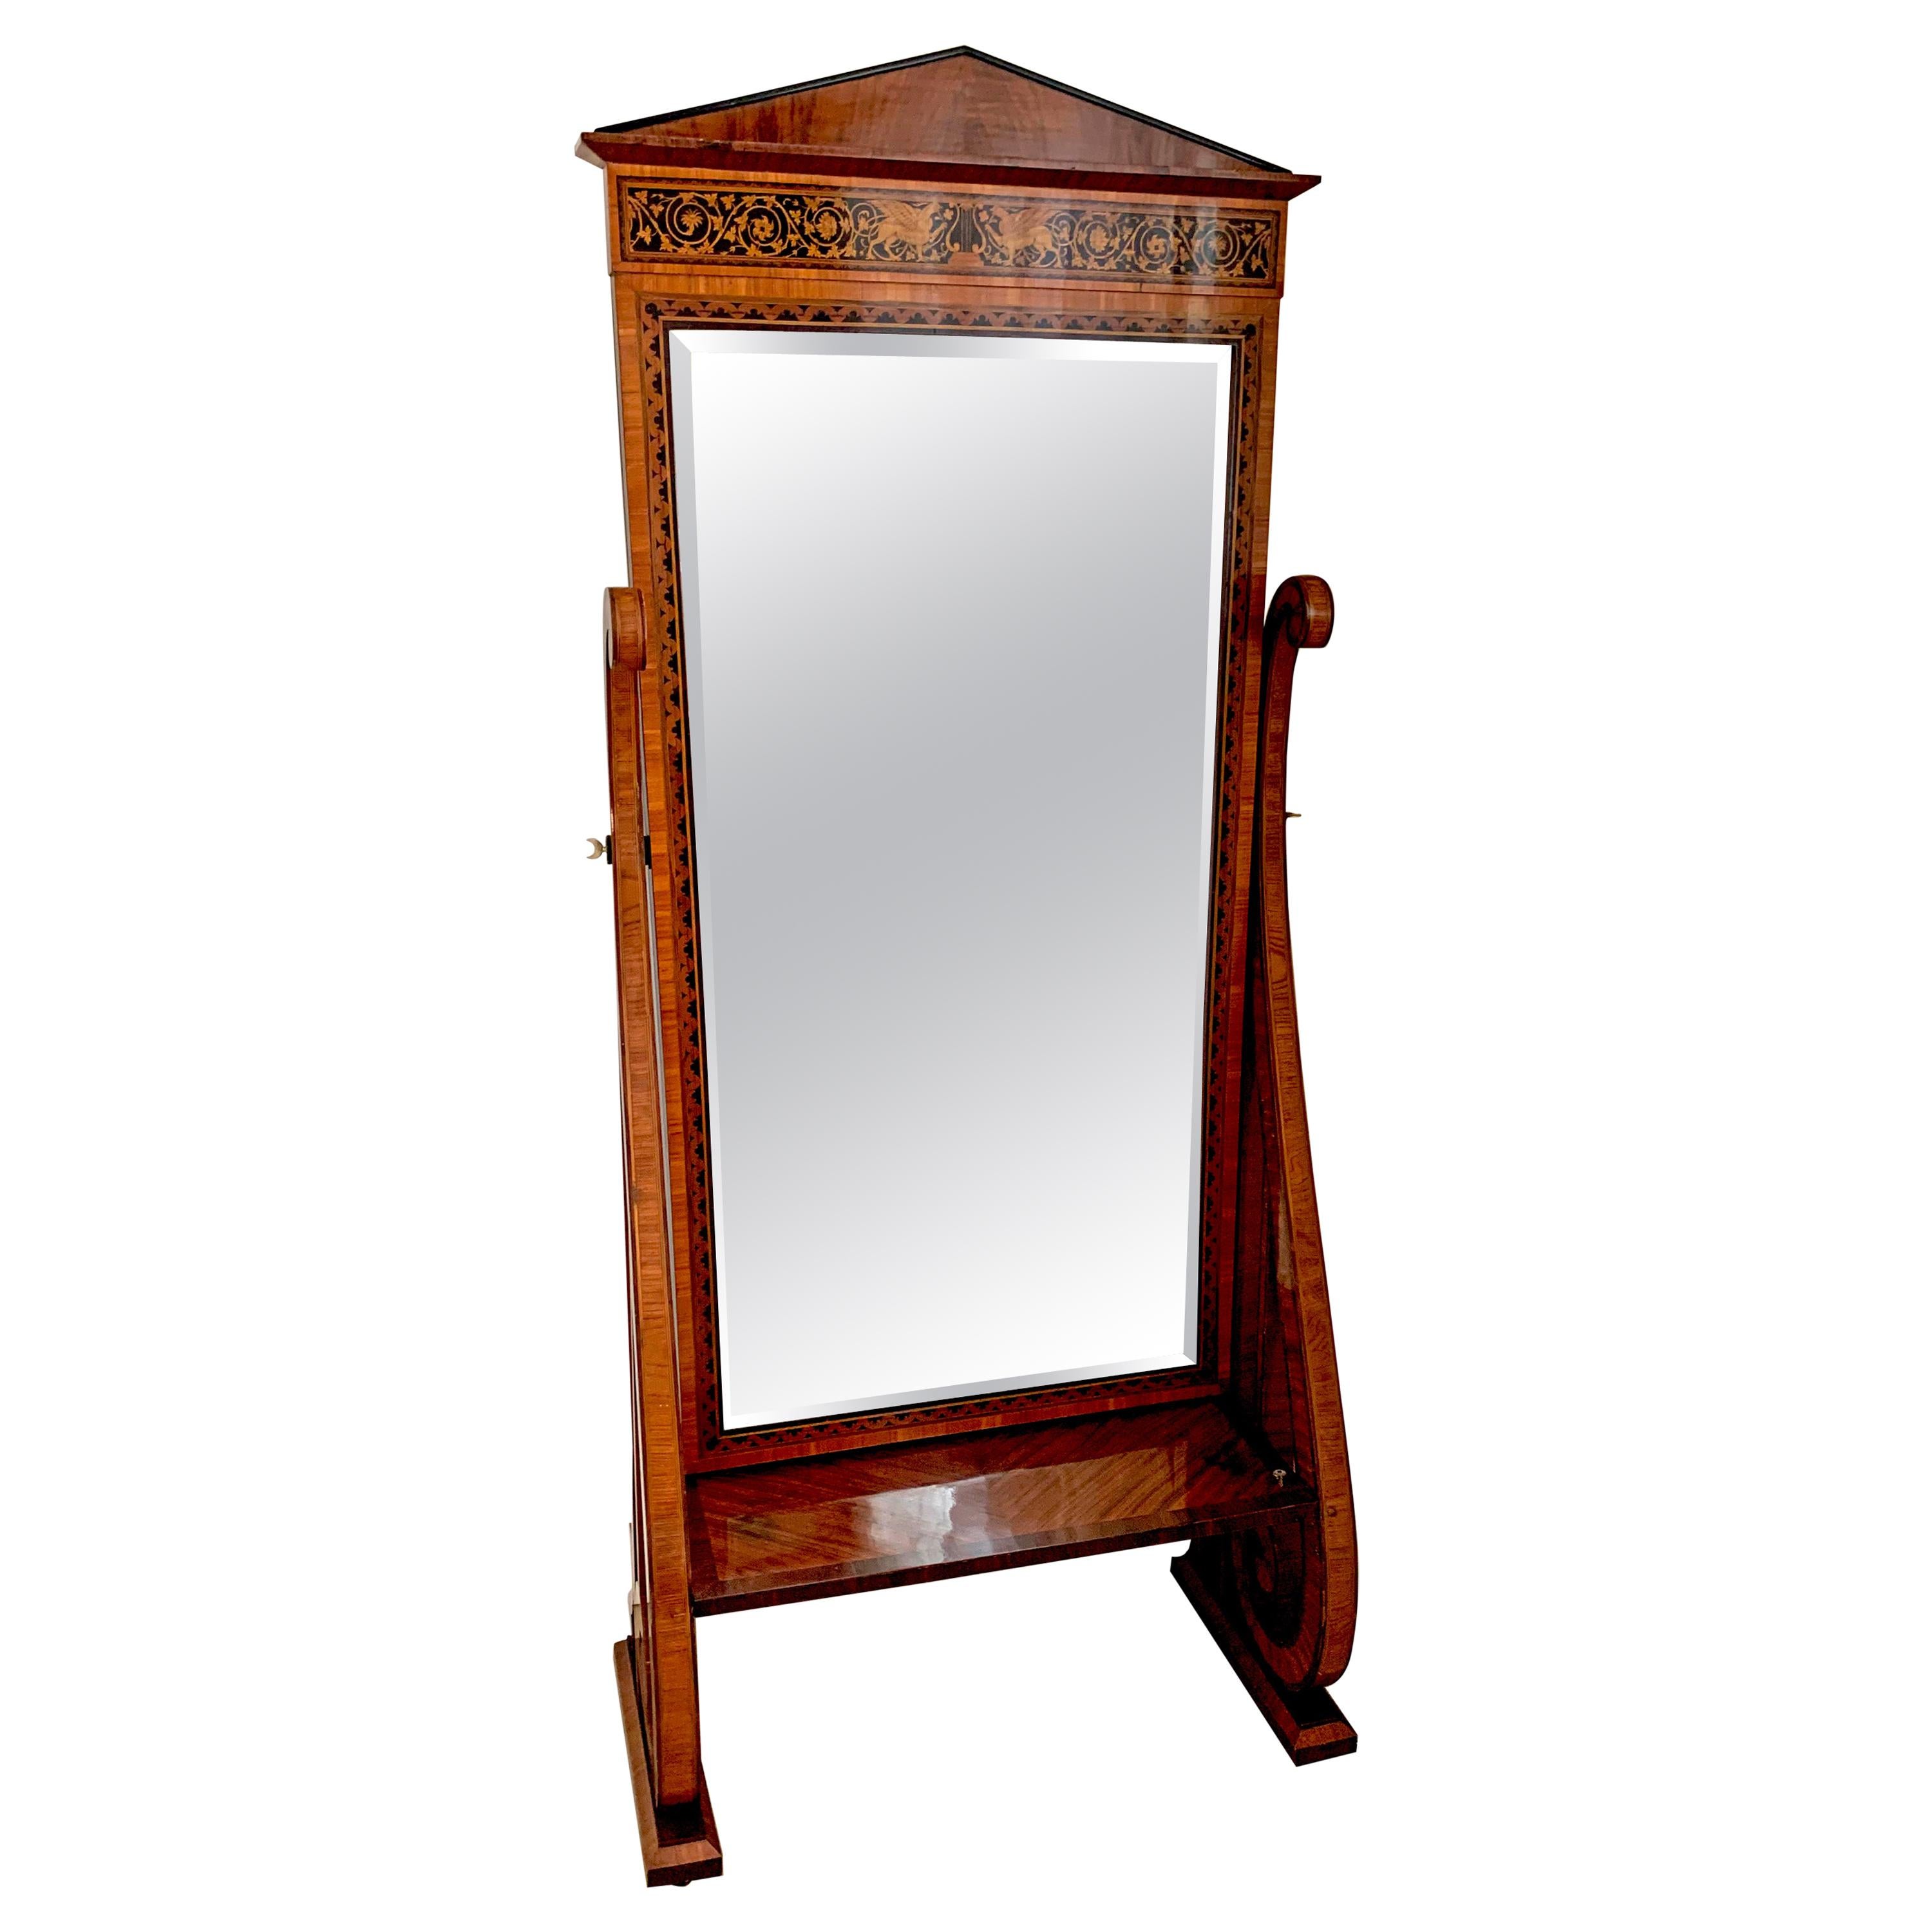 Late 19th Century Rosewood Standing Mirror with Marquetry in Black Wood